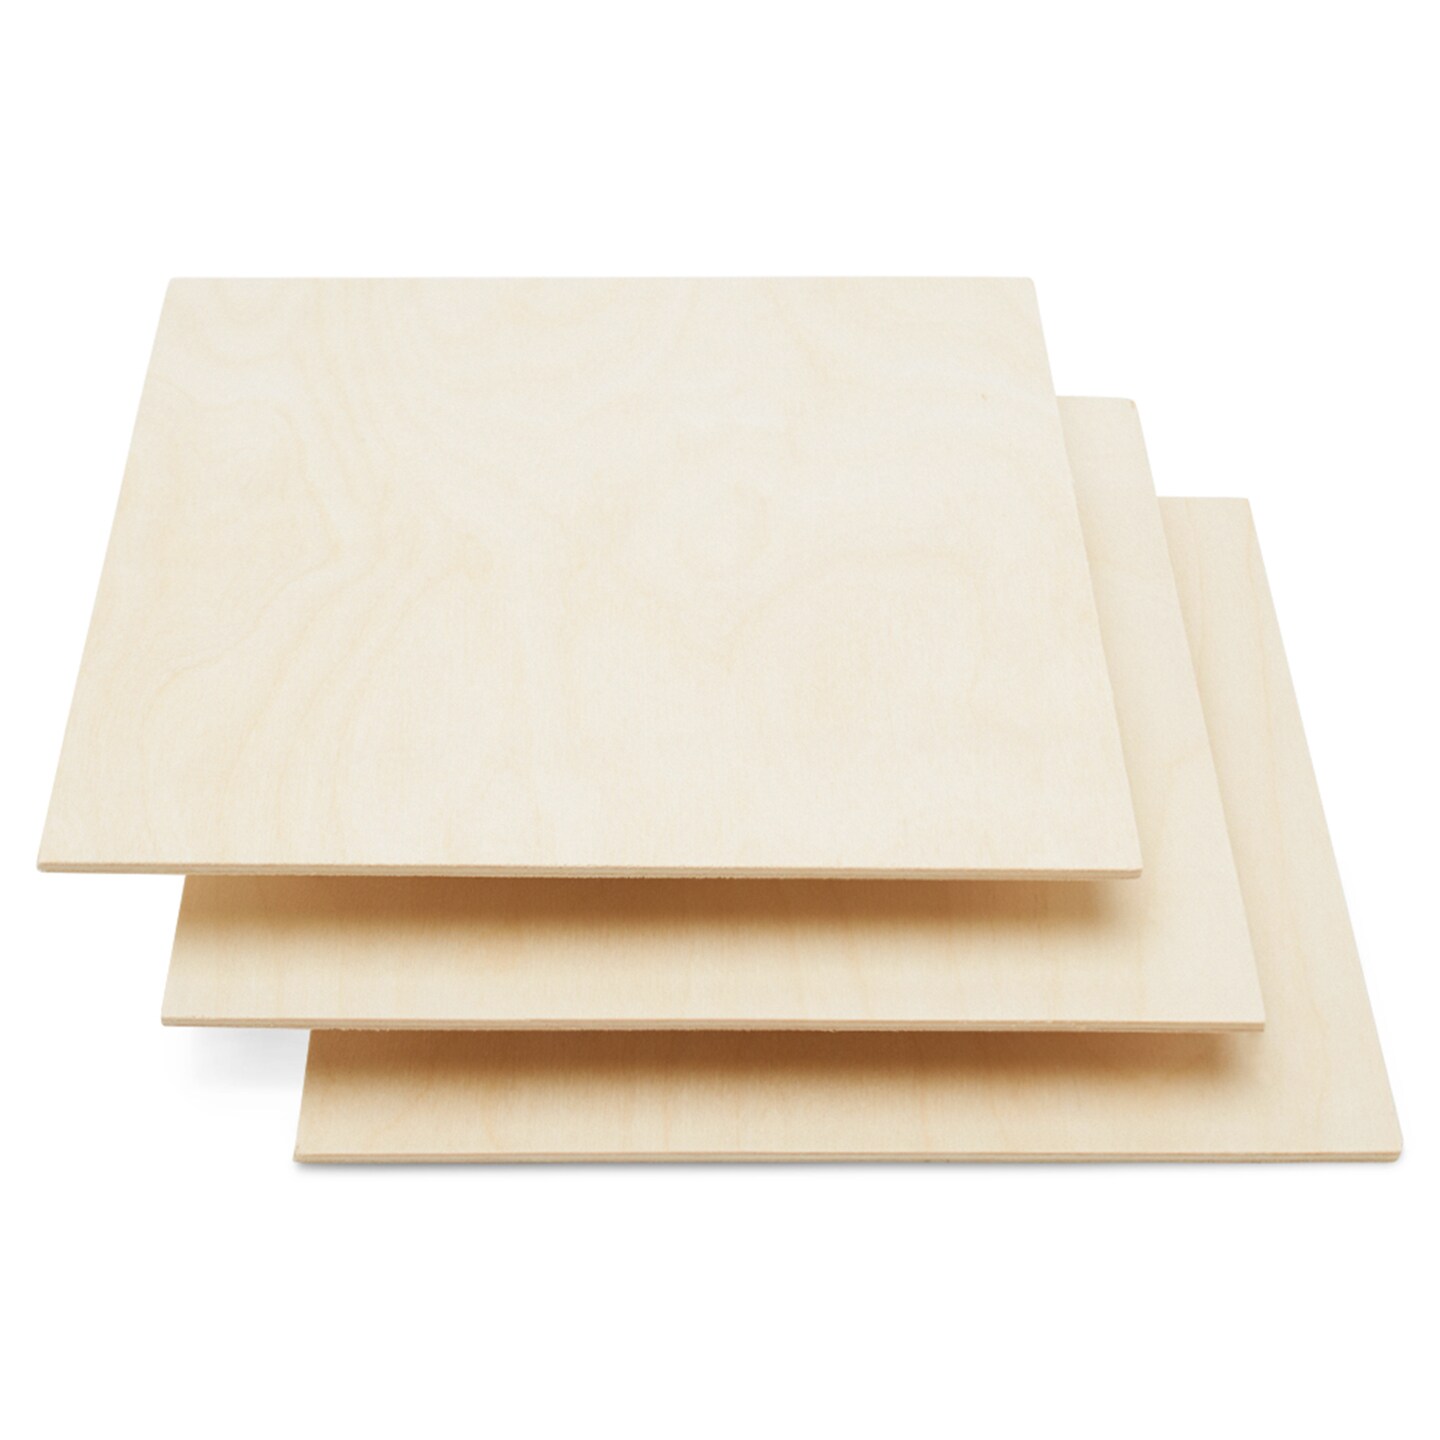 Baltic Birch Plywood, 6 mm 1/4 x 12 x 20 Inch Craft Wood, Pack of 25 B/BB  Grade Baltic Birch Sheets, Perfect for Laser, CNC Cutting and Wood Burning,  by Woodpeckers 